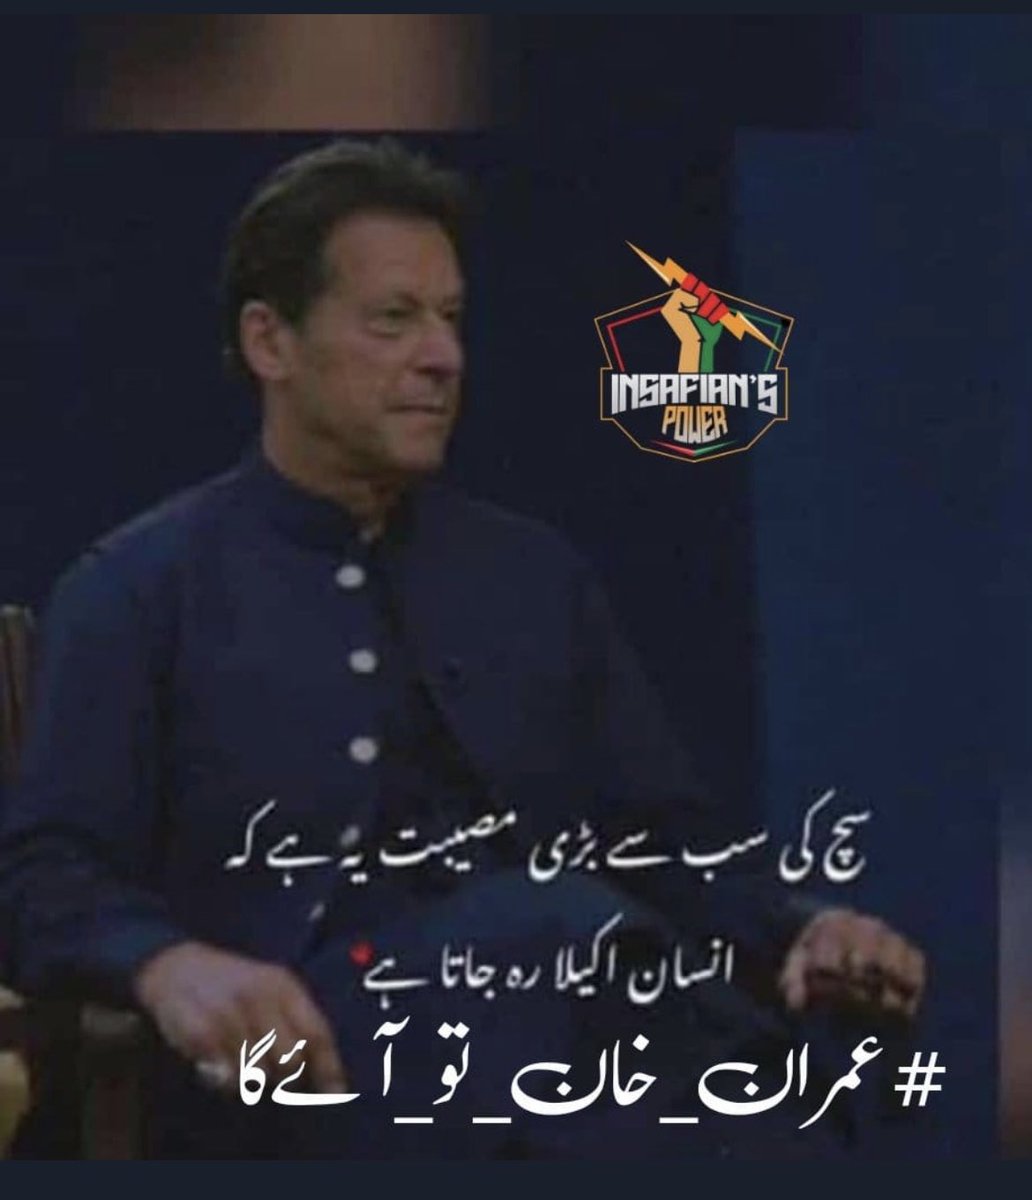 You can't take out an idea with a stick, the policy of oppression has failed - Imran Khan 

#عمران_خان_تو_آئےگا 
@TeamiPians